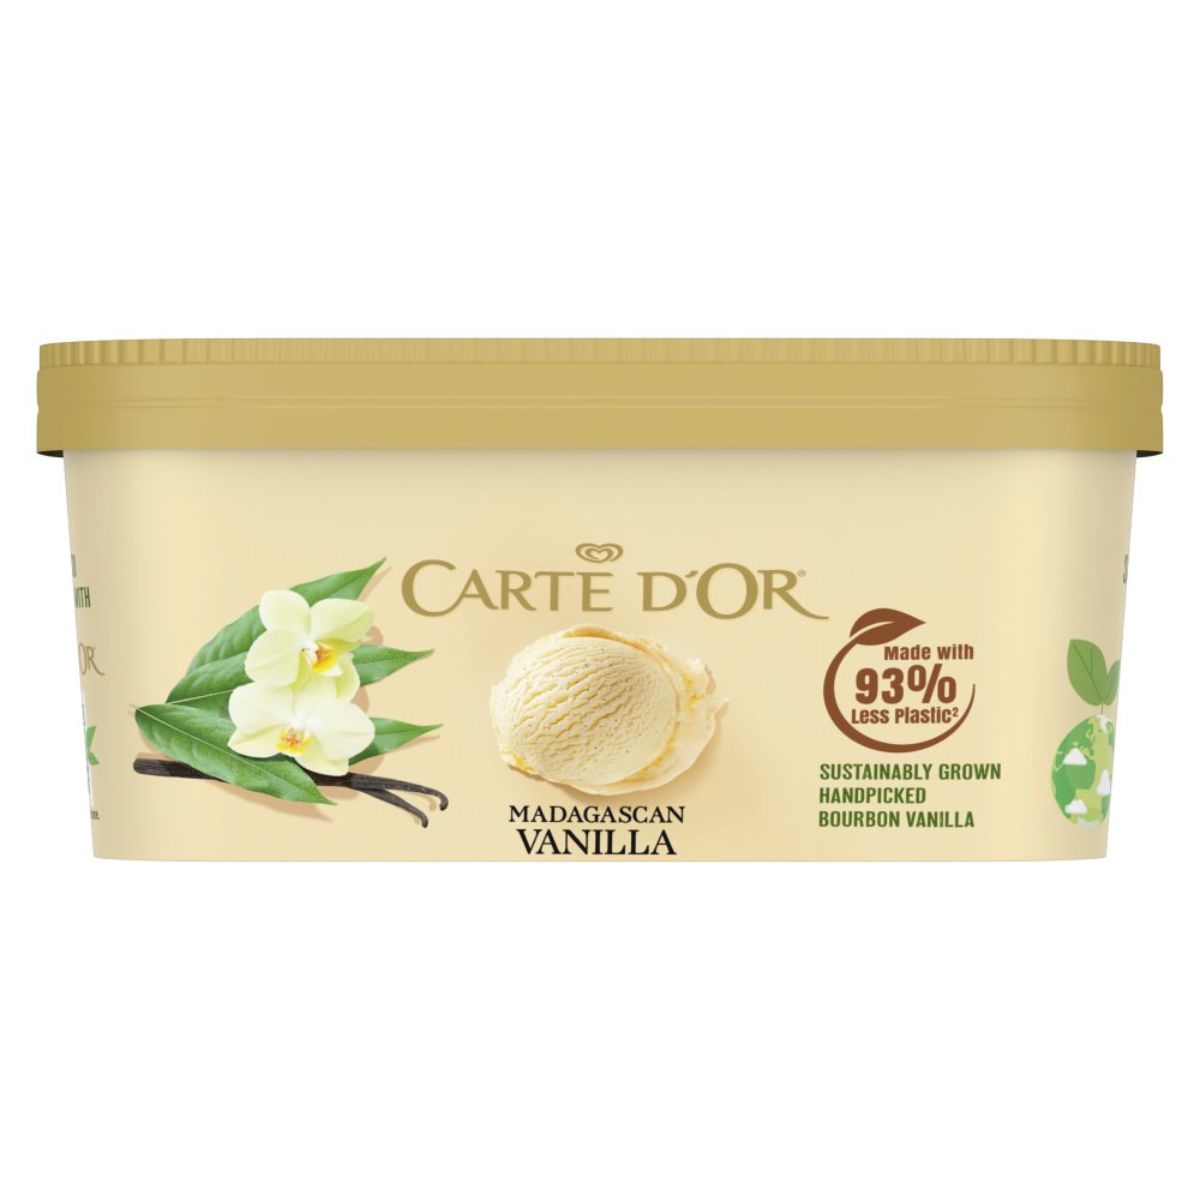 A Carte Dor Madagascan vanilla ice cream tub with an image of a scoop and vanilla flowers, highlighting that it's made with sustainably grown bourbon vanilla.